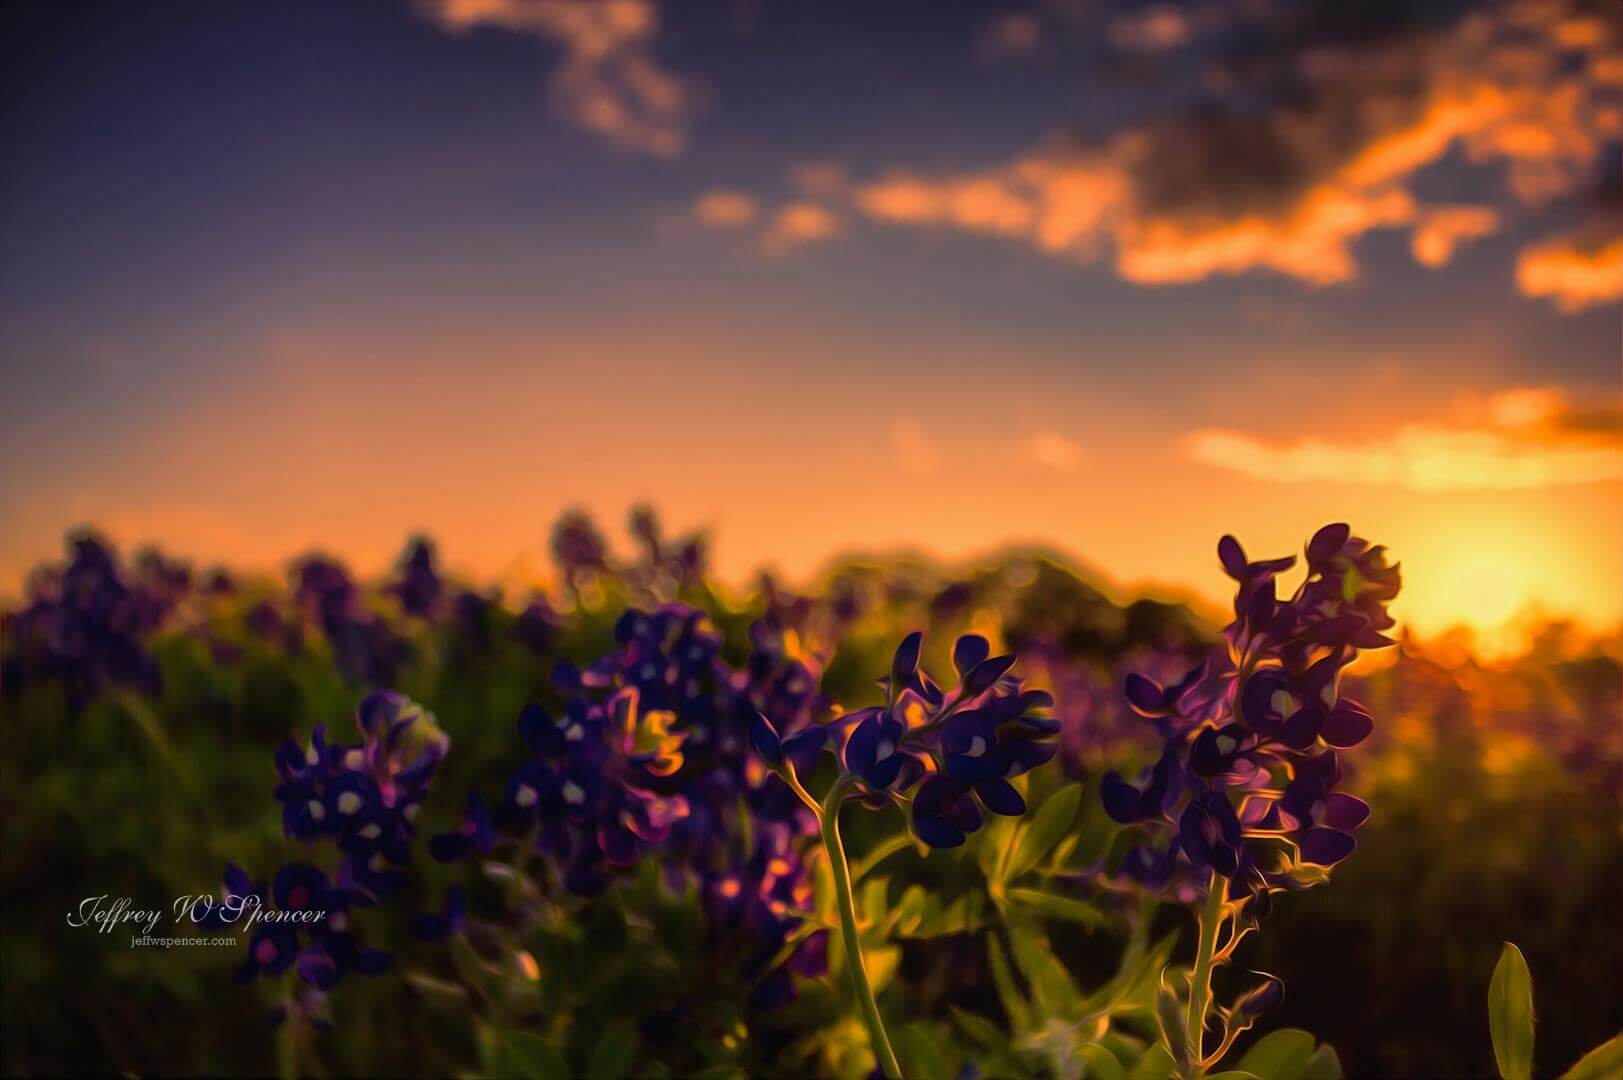 Close up of deep purple flowers low to the ground with a colorful sunset and wispy clouds in the background